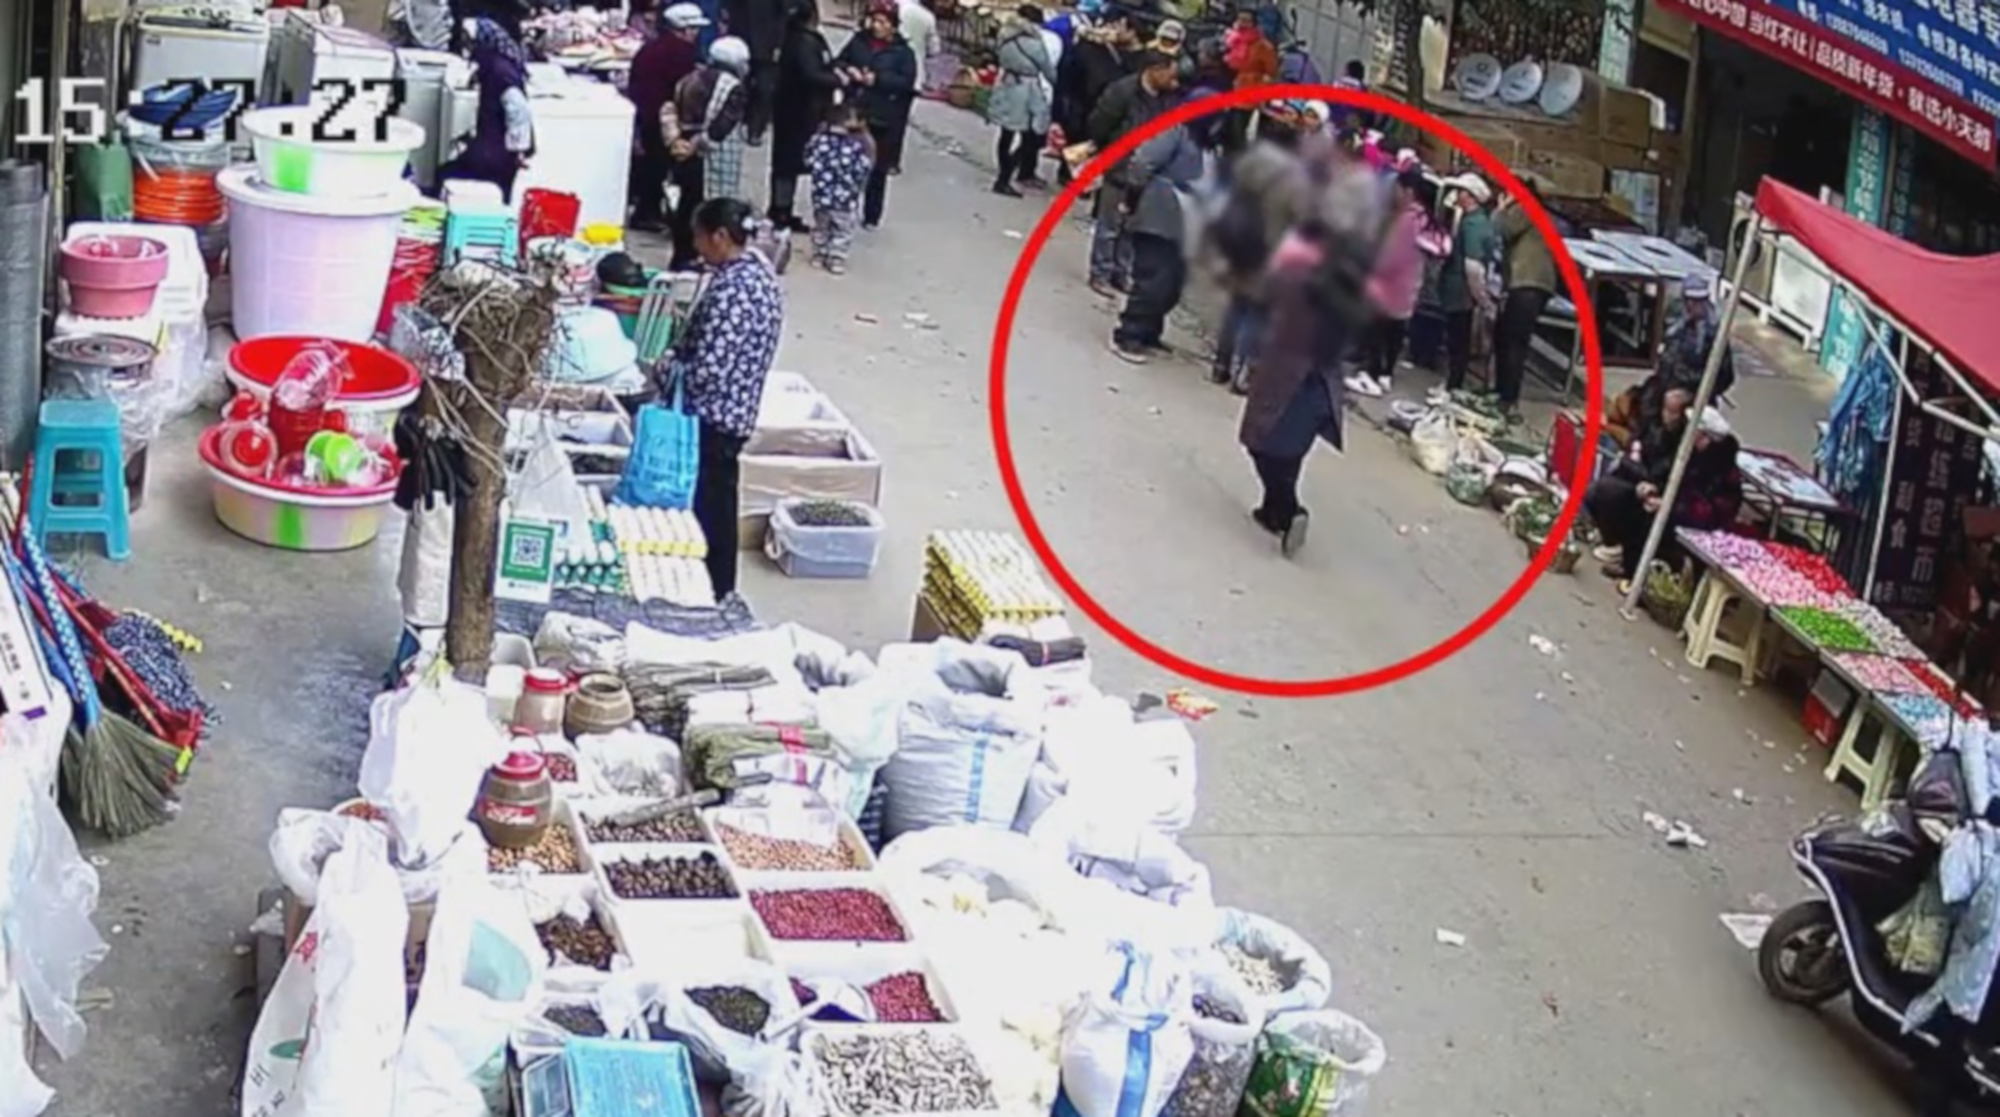 Read more about the article Chilling Moment 2yo Girl Kidnapped From Crowded Market